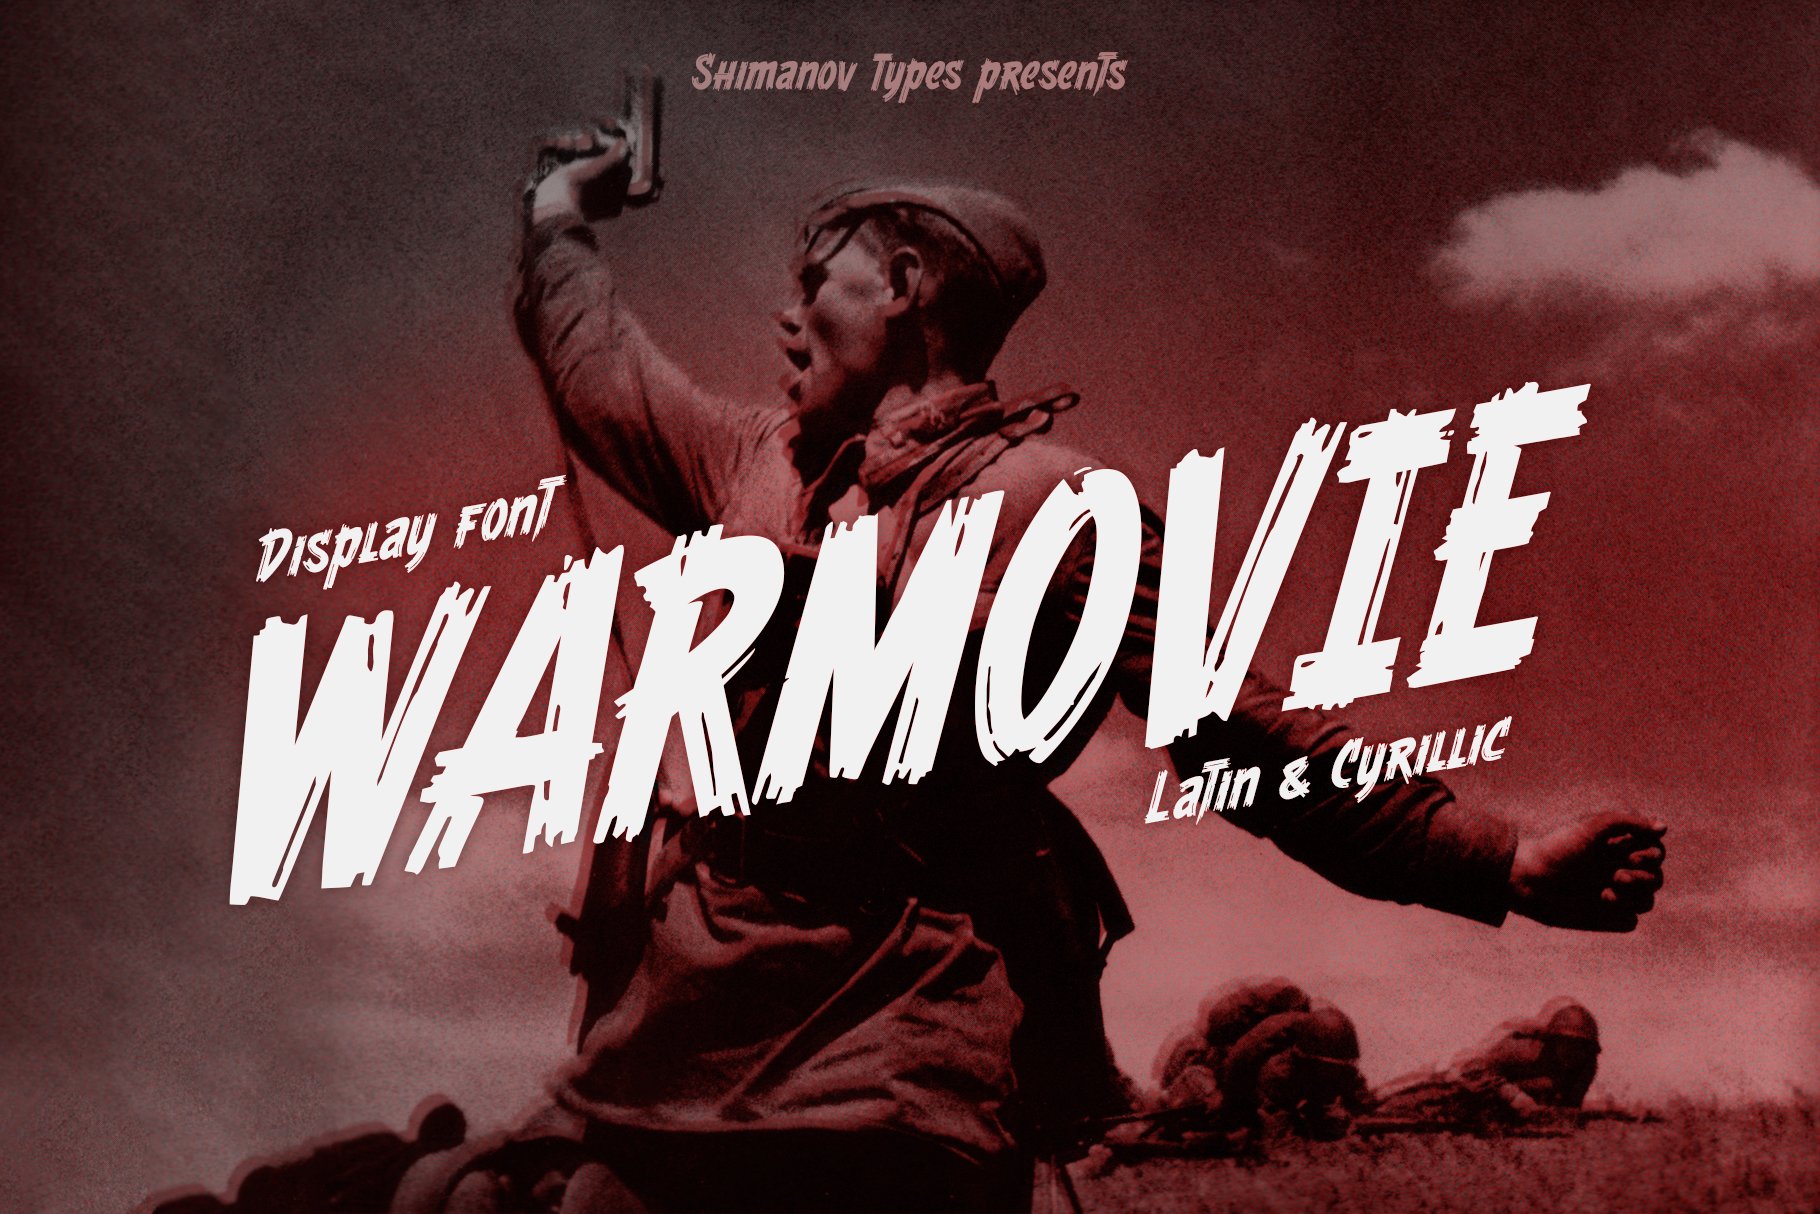 ST-WARMOVIE display font cover image.